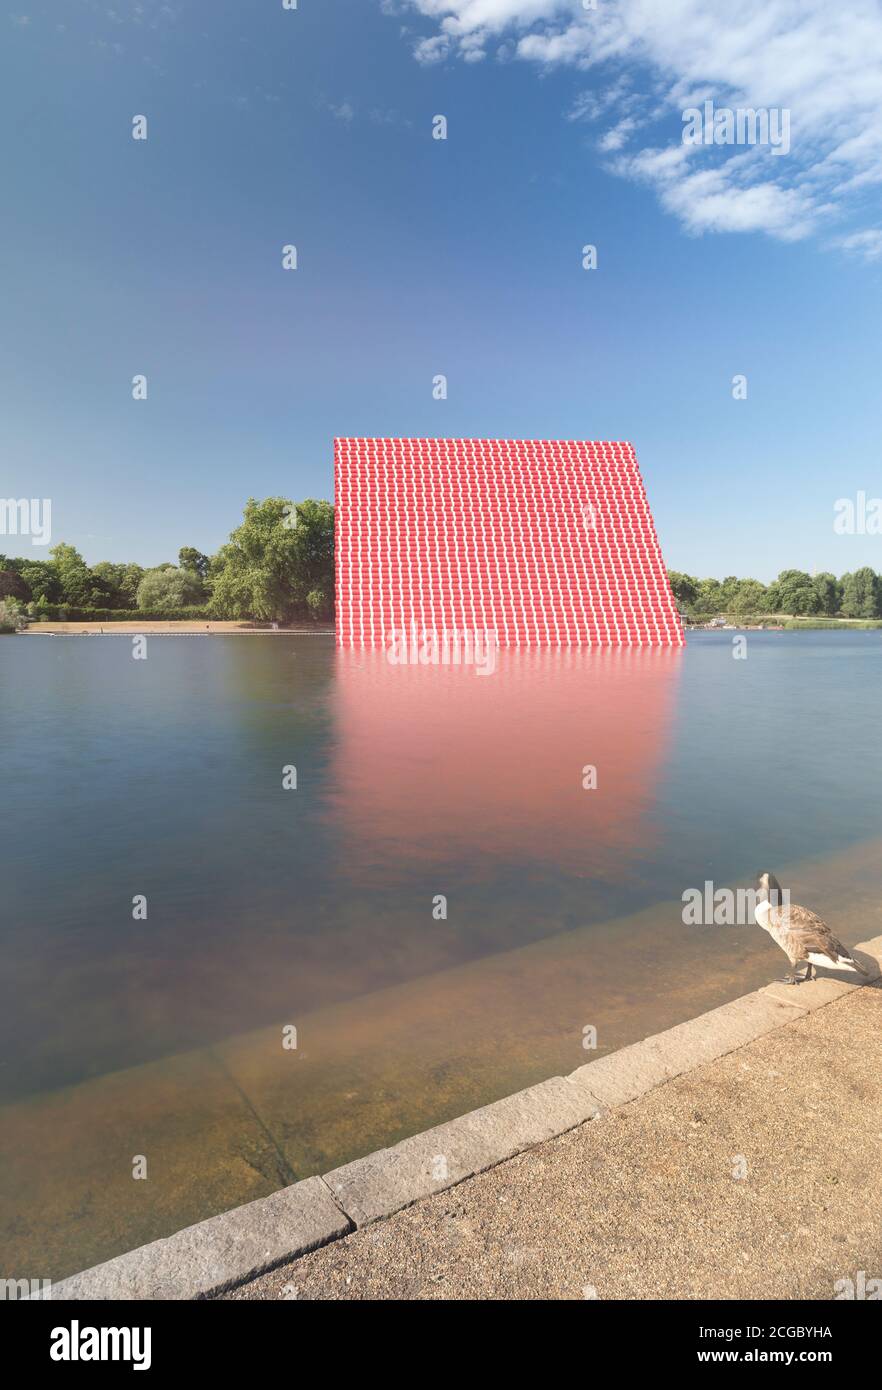 The London Mastaba by Christo and Jeanne-Claude is a temporary sculpture in Hyde Park comprised of horizontally stacked barrels on a floating platform in Serpentine Lake. Installed for the summer 2018 in London, UK. Stock Photo